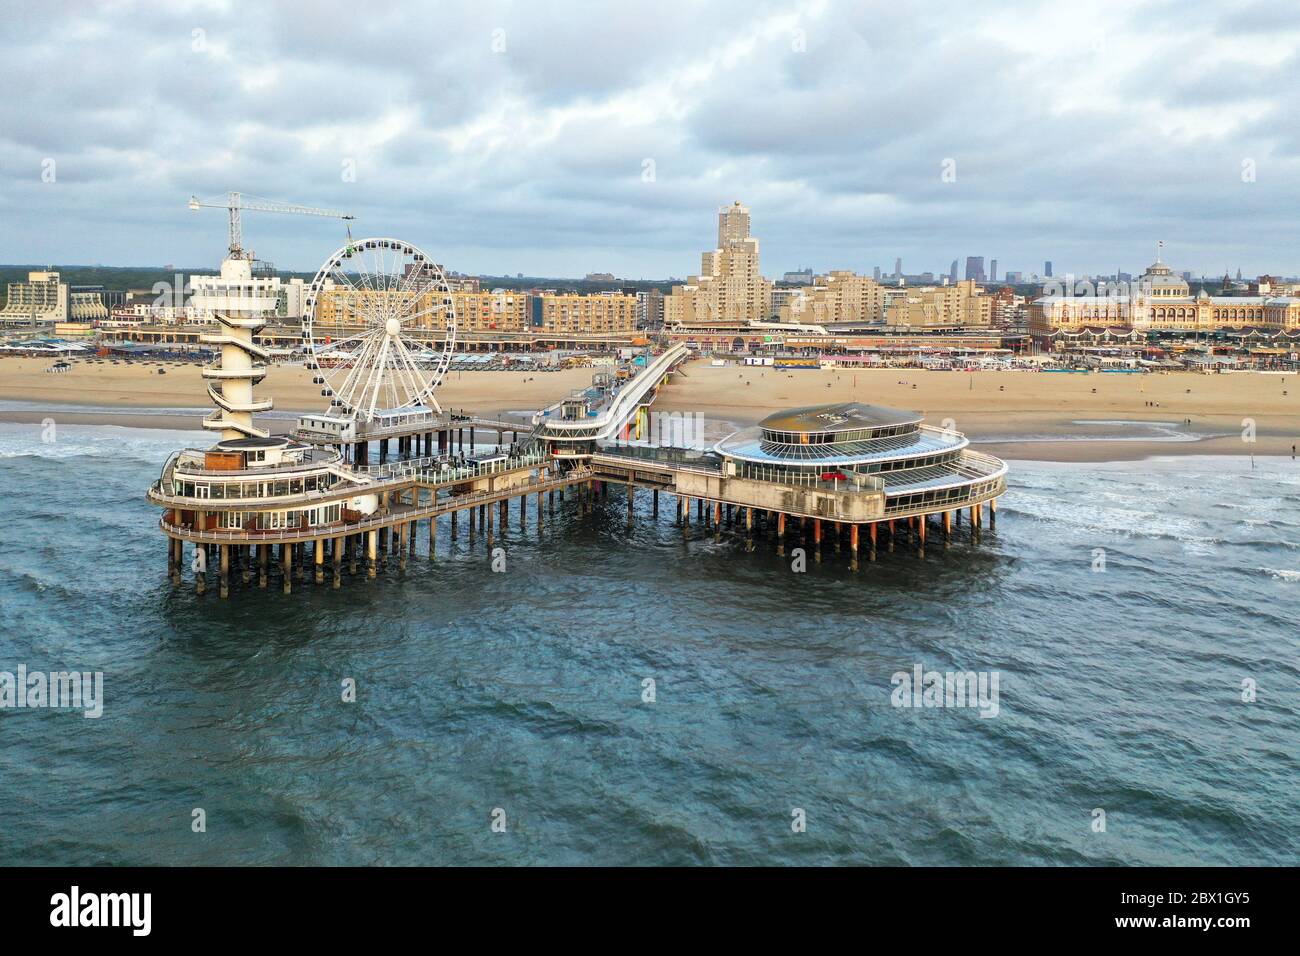 Aerial view of the beach and Pier of Scheveningen during COVID-19